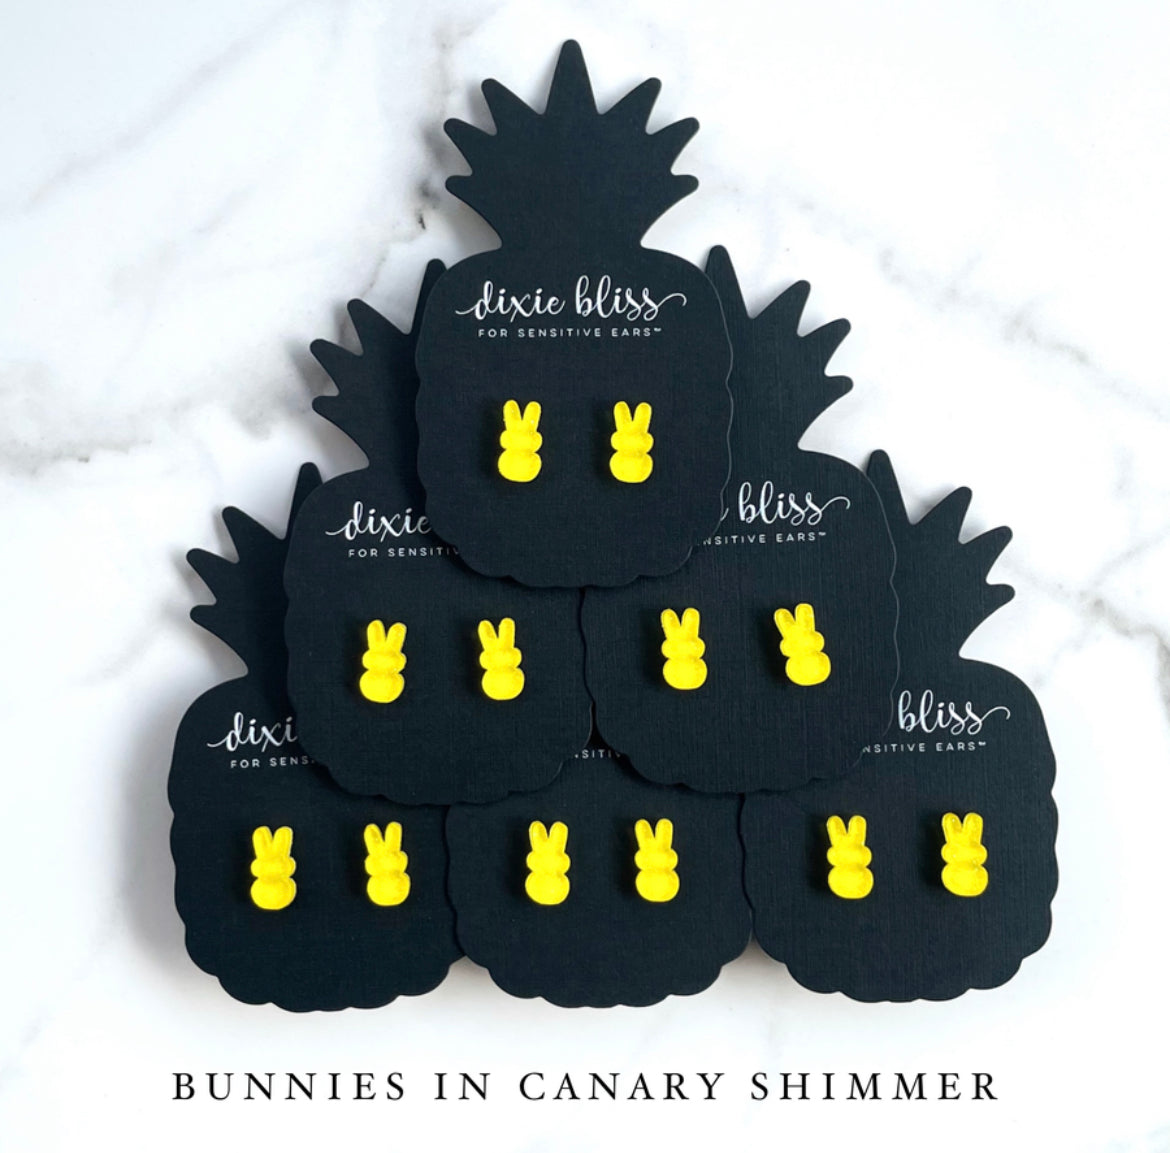 Bunnies in Canary Shimmer - Dixie Bliss - Stud Earrings